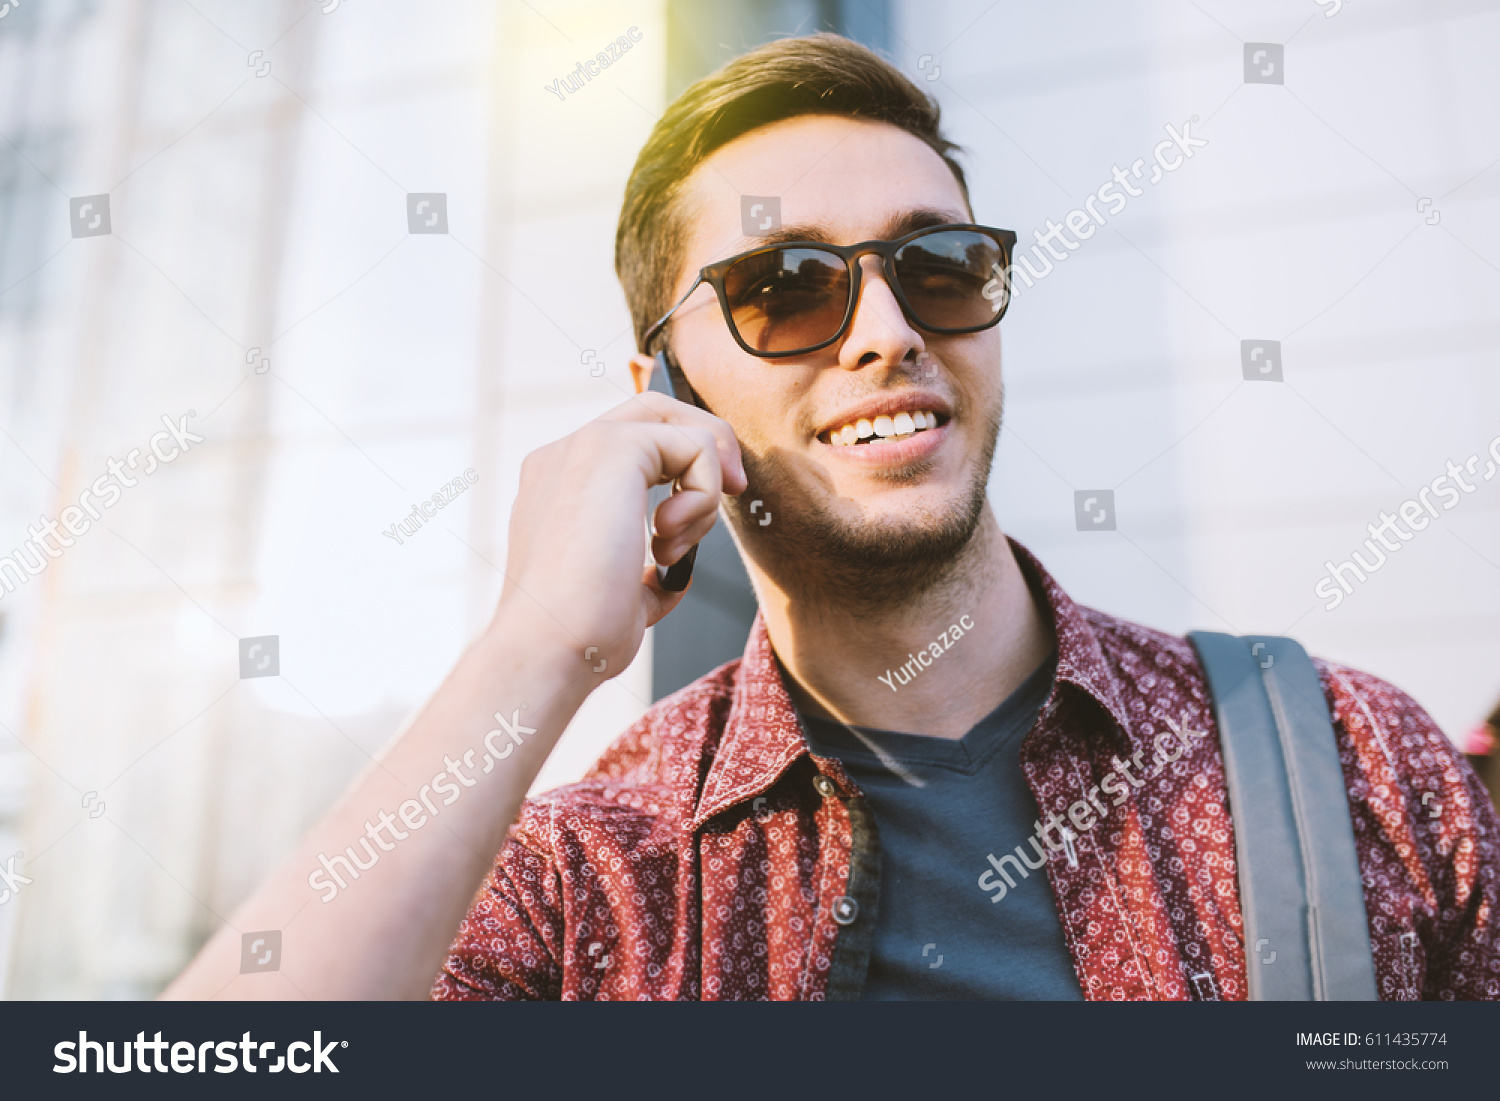 Close up portrait of cheerful attractive smile caucasian man in stylish sunglasses in 
city. Young business man talking on smart phone, on building outdoors. Fashion urban lifestyle concept. Traveler. #611435774